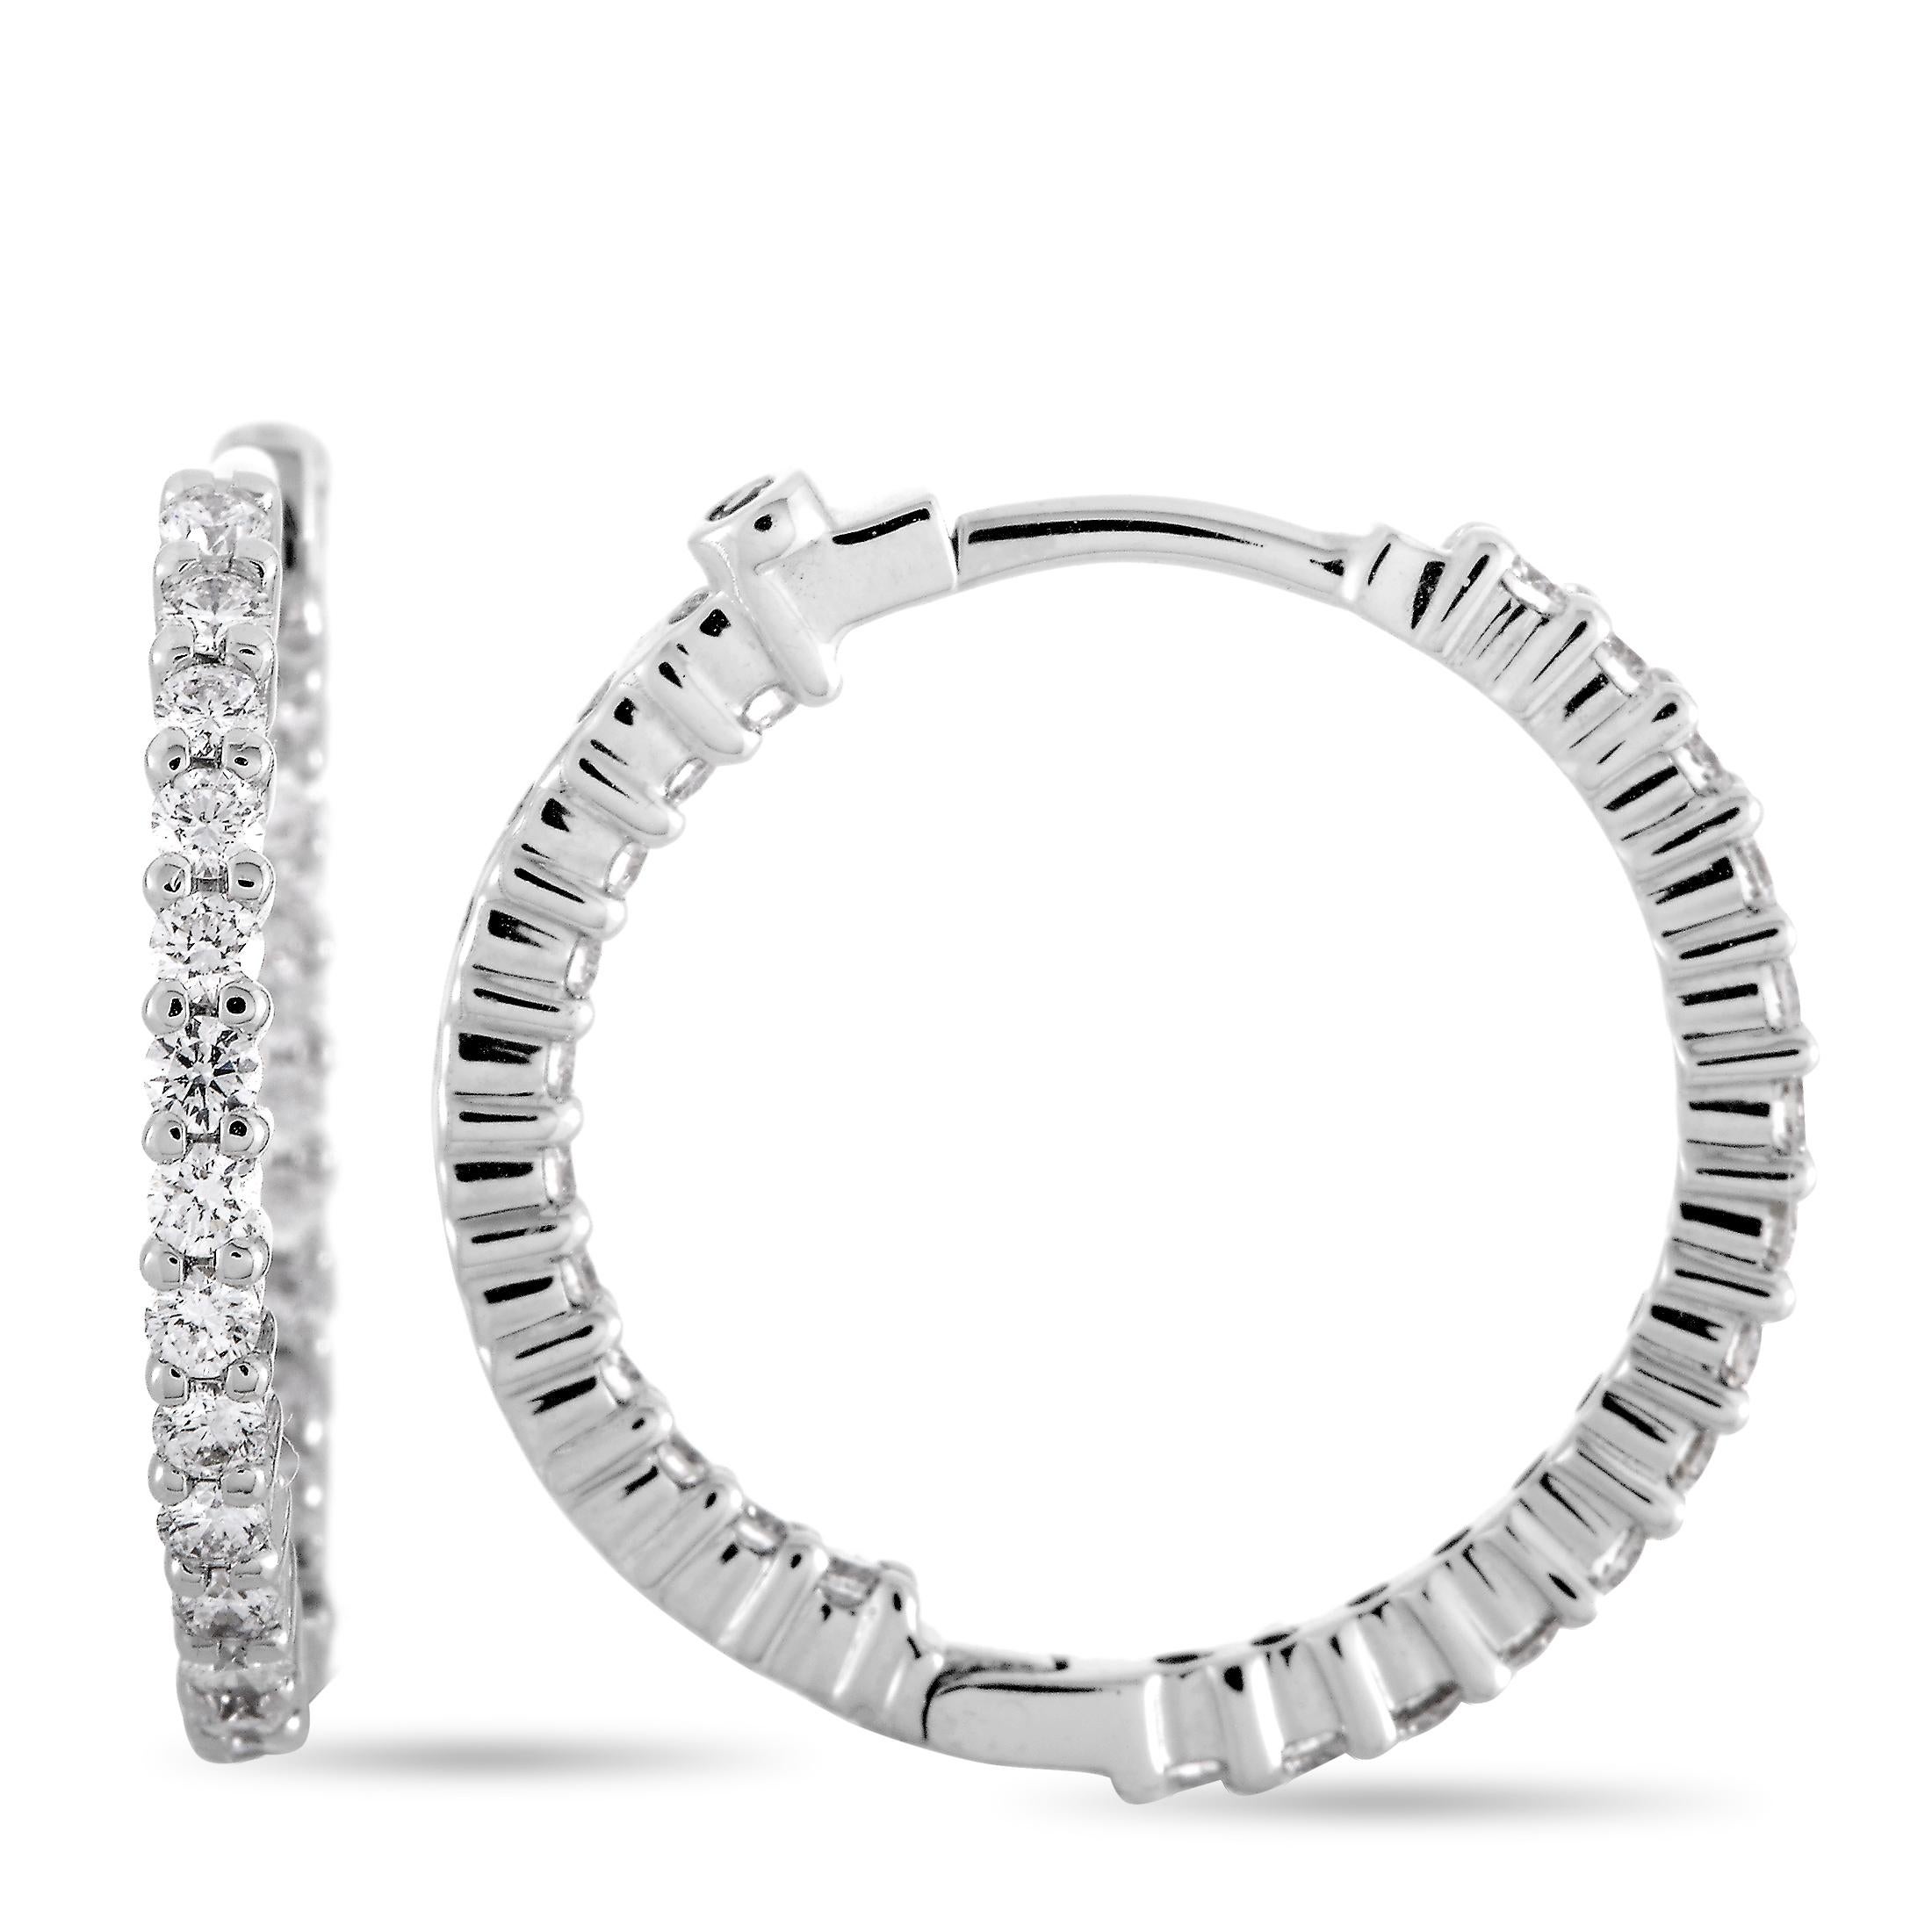 The Roberto Coin “Perfect Hoops” earrings are made out of 18K white gold and diamonds that weigh 1.00 carat in total. The earrings measure 0.88” by 0.15” and each of the two weighs 2.5 grams.
 
 This pair of earrings is offered in brand new